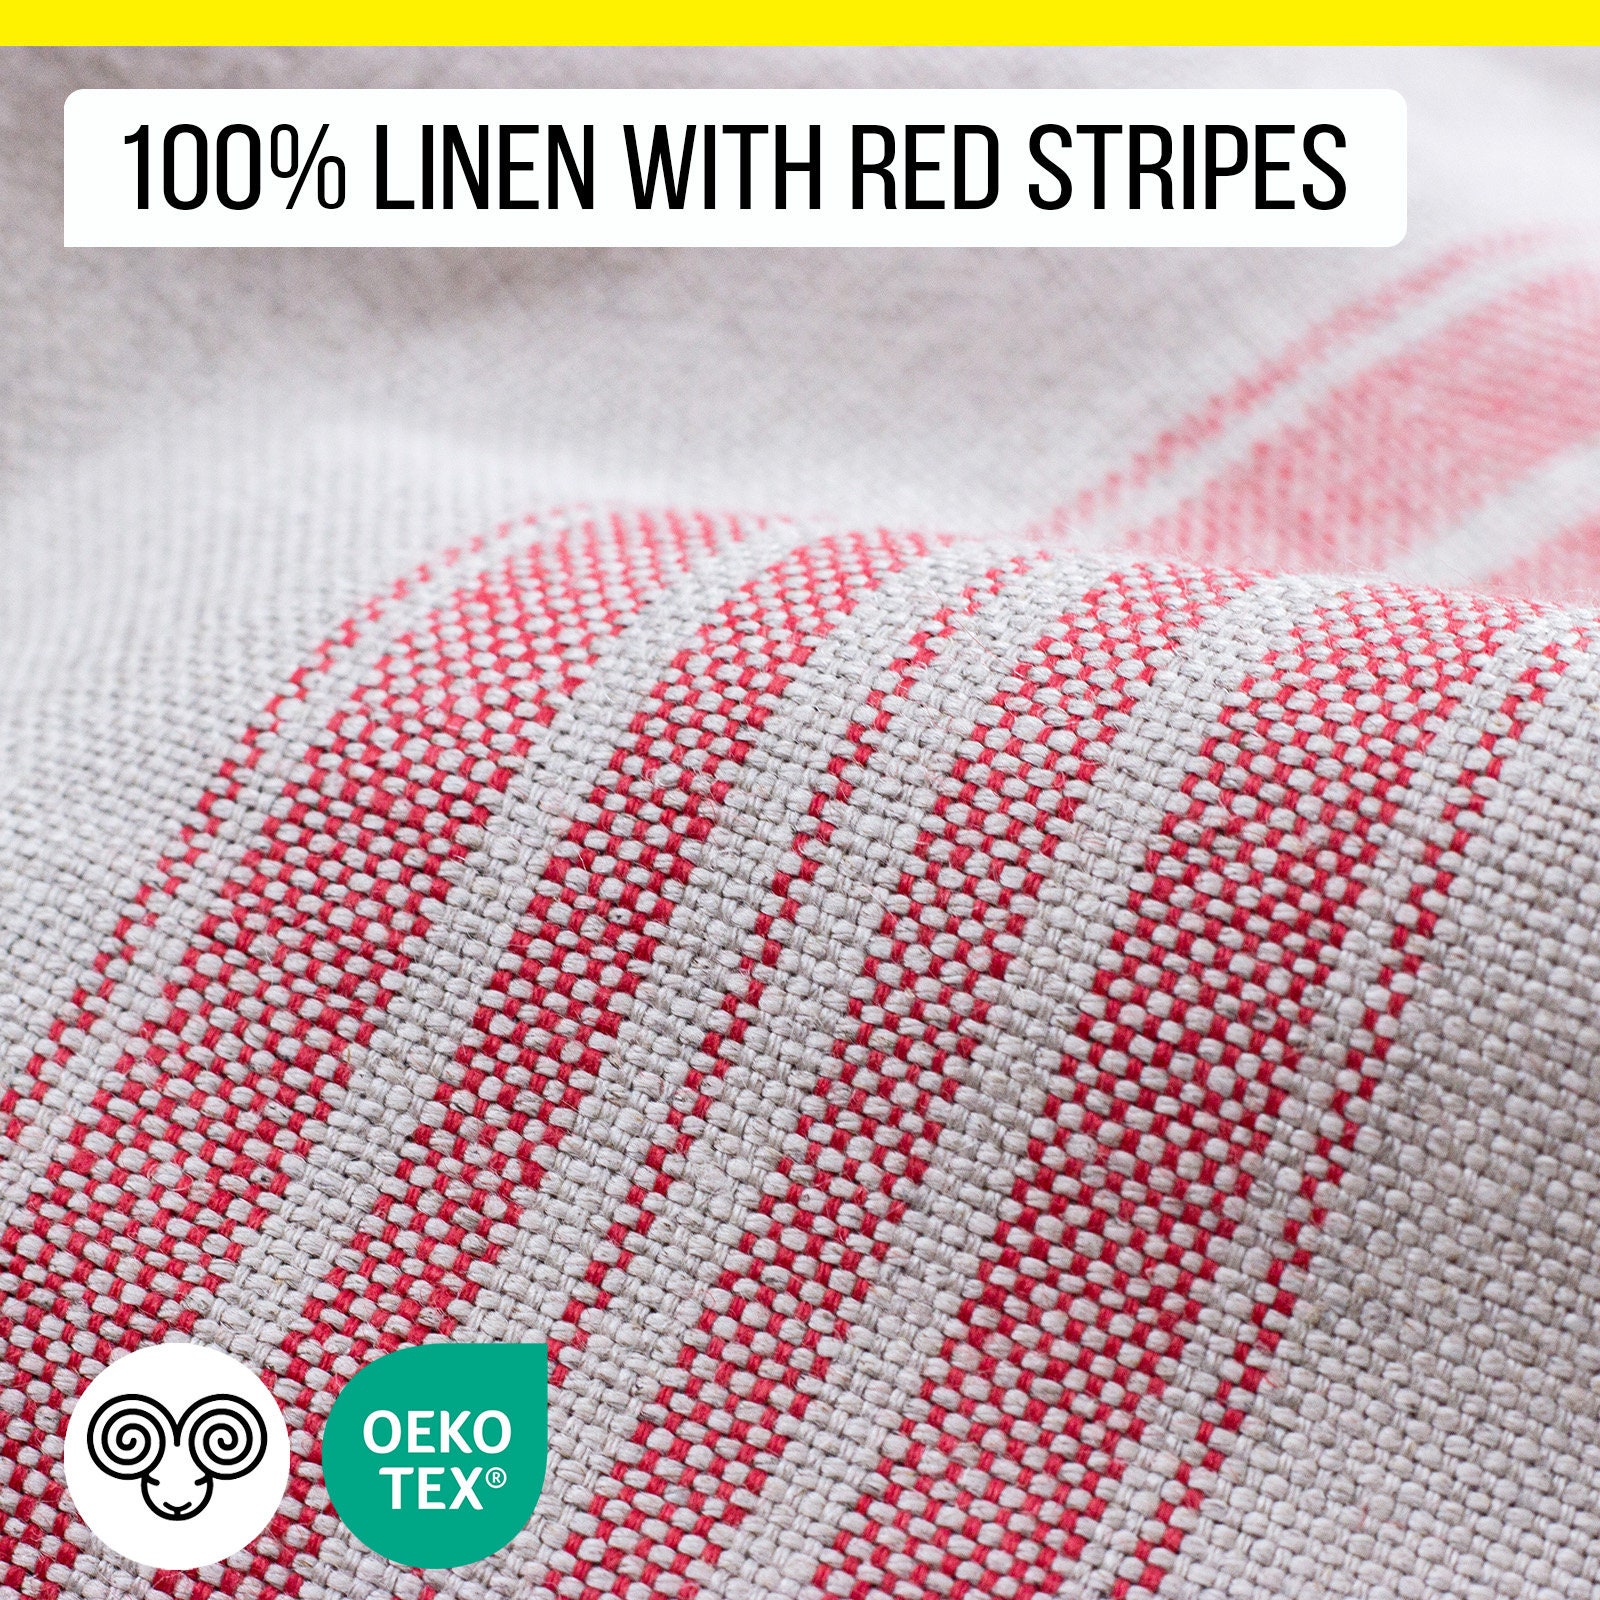 Red Striped Linen flax Fabric / OEKO-TEX® Certified / Width 150 Cm 59 / by  the Yard 